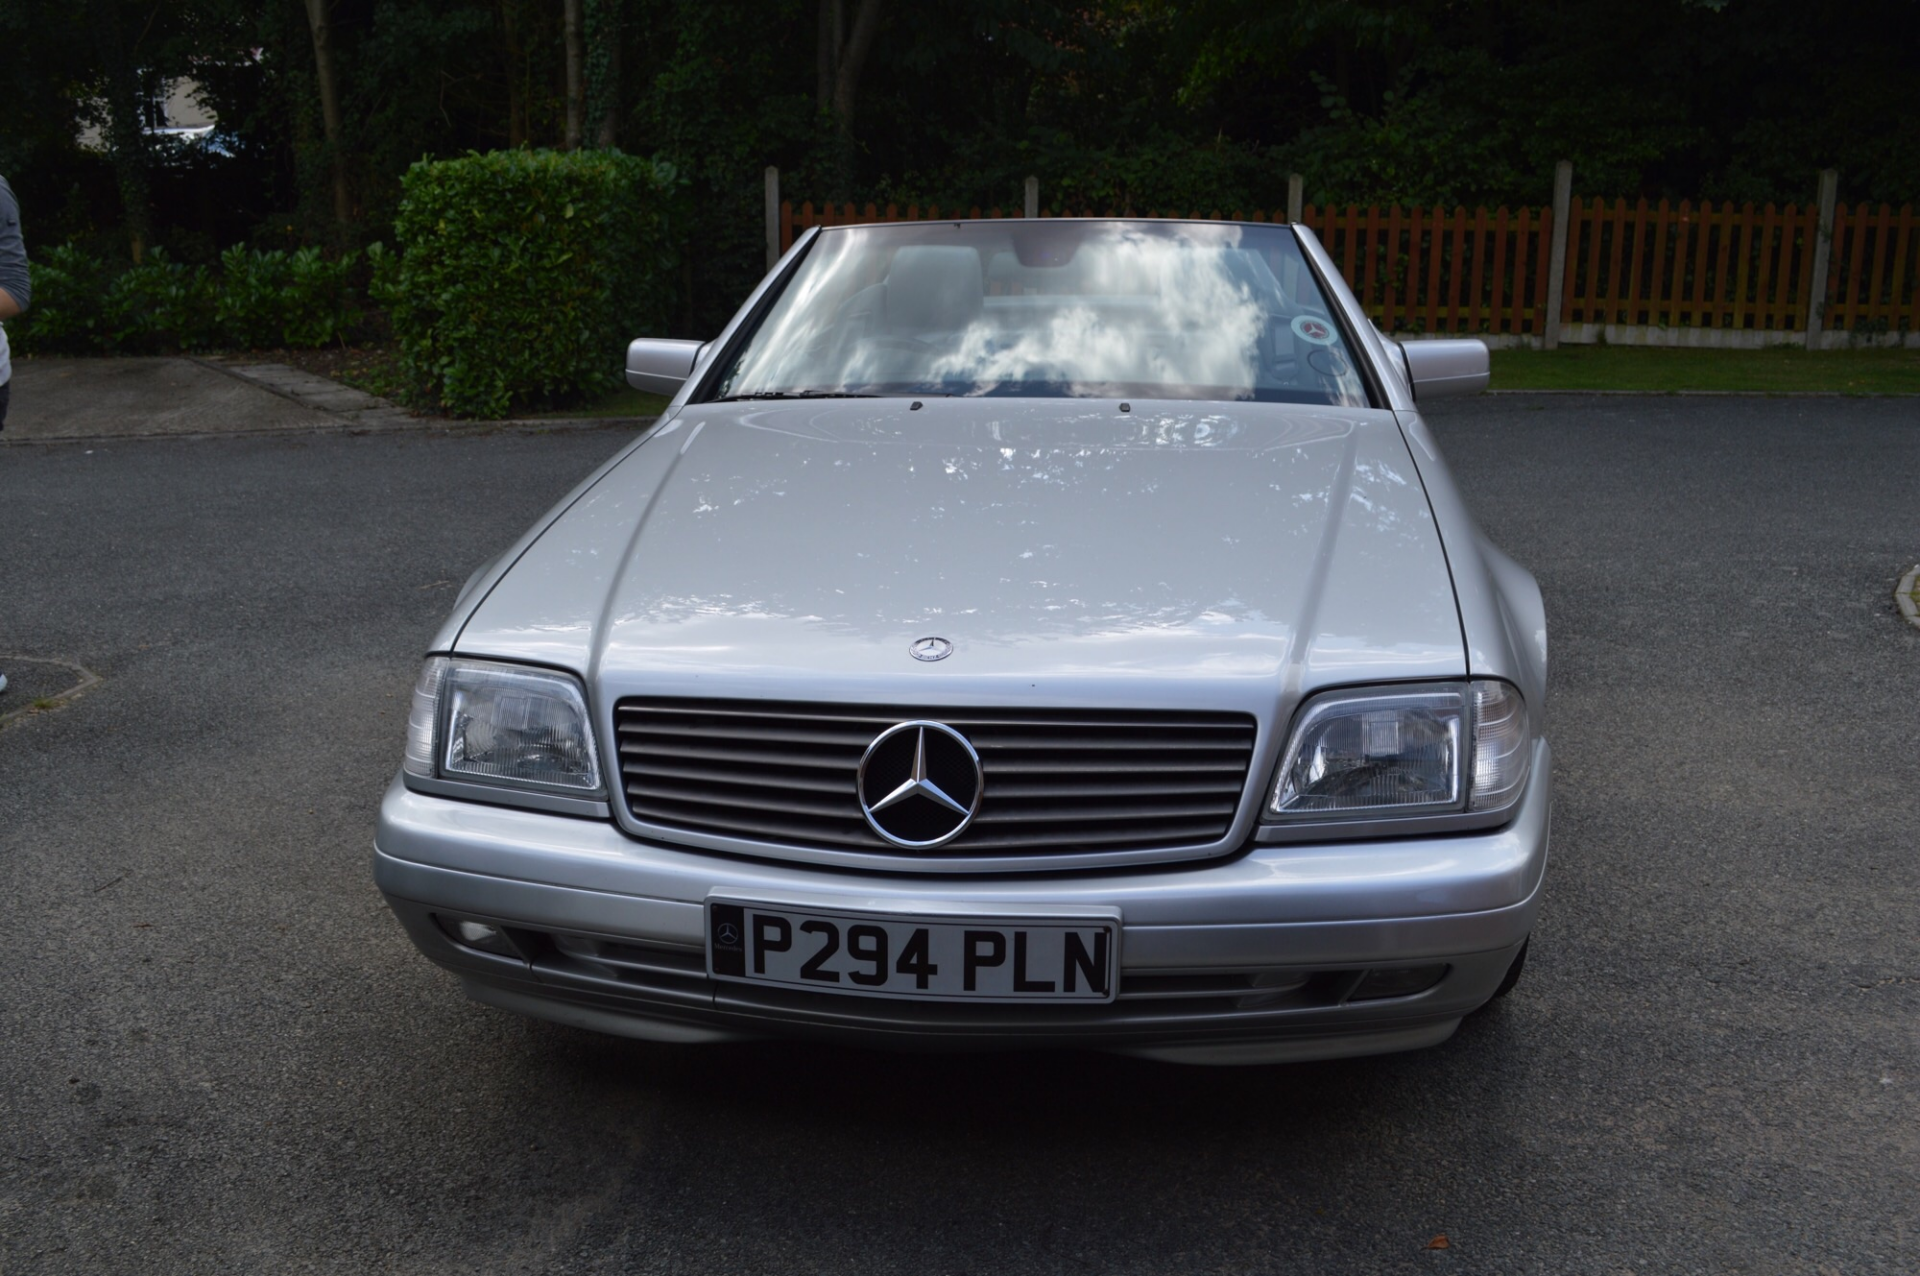 Mercedes Benz SL Class Automatic Sports Convertible (Hard and soft top)